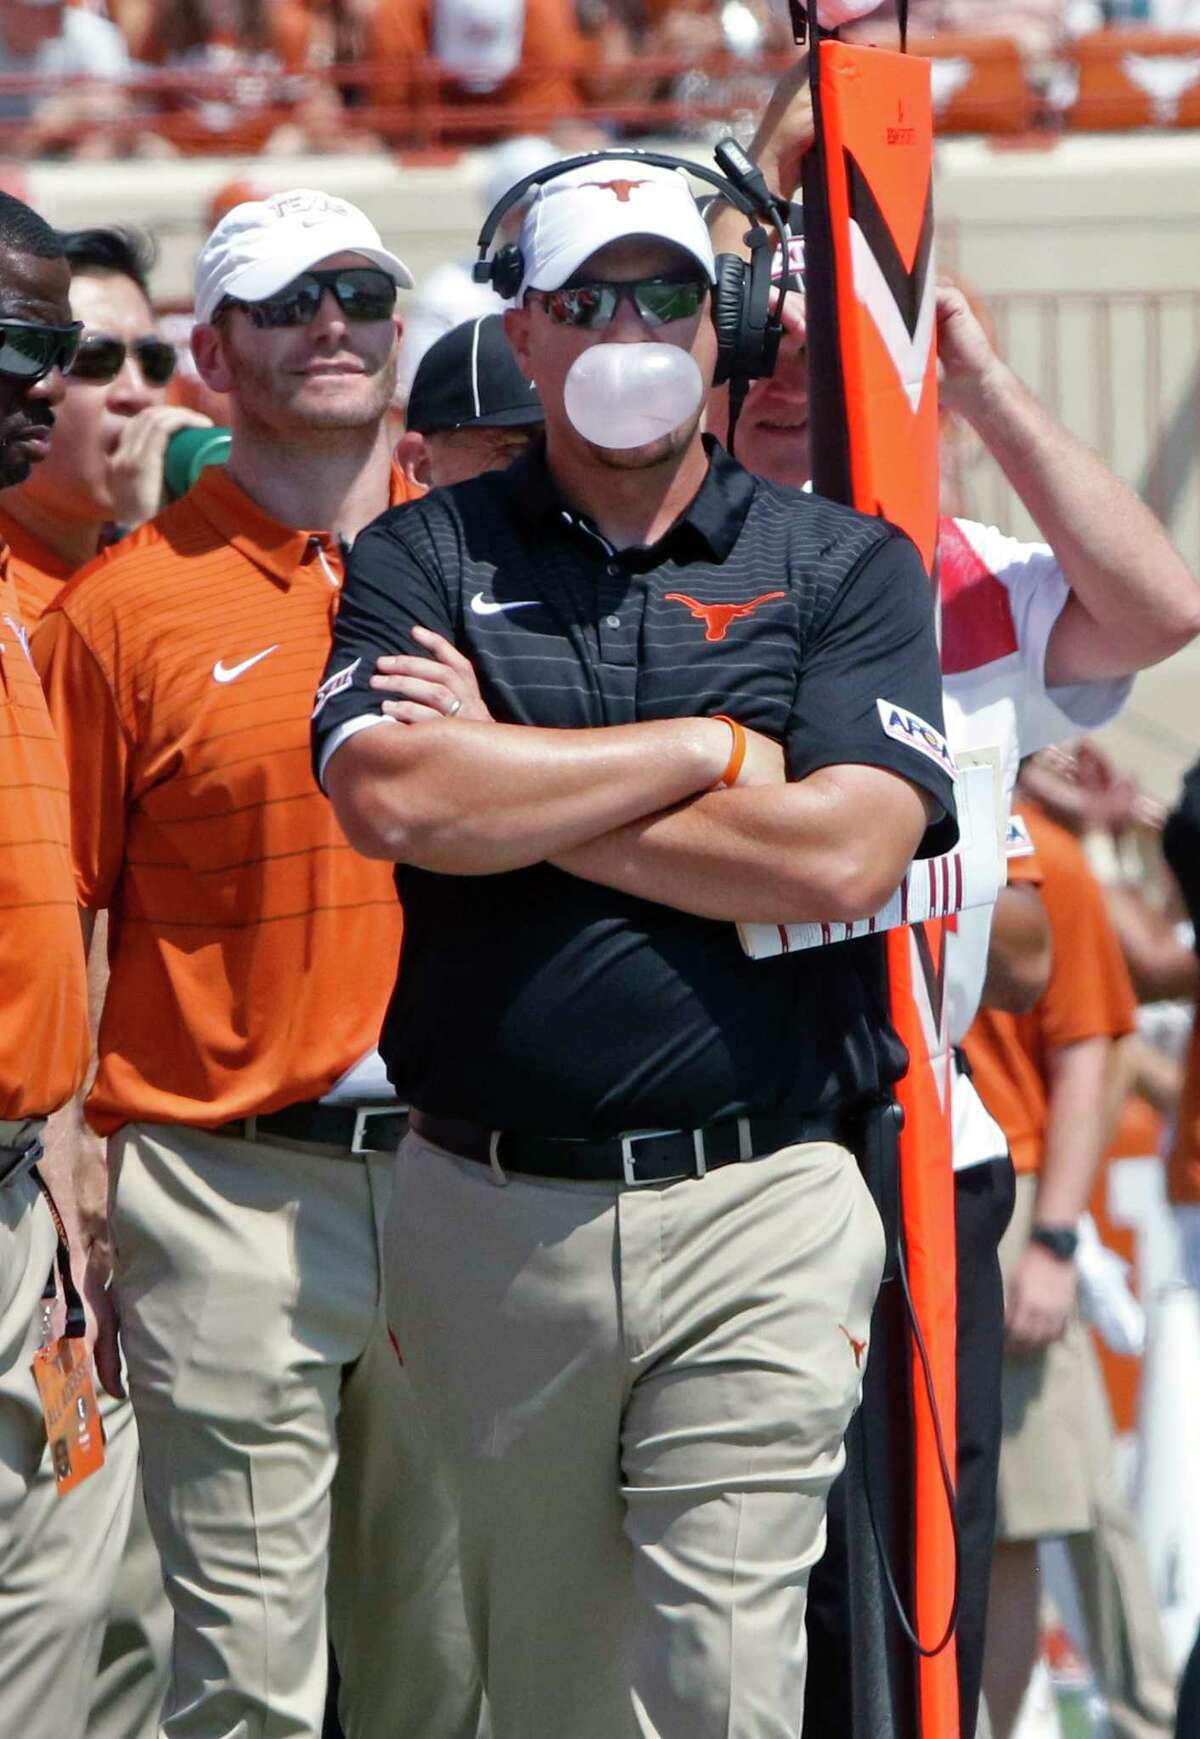 Texas head coach Tom Herman blows a bubble during the first half of an NCAA college football game against Maryland, Saturday, Sept. 2, 2017, in Austin, Texas. Maryland won 51-41. (AP Photo/Michael Thomas)